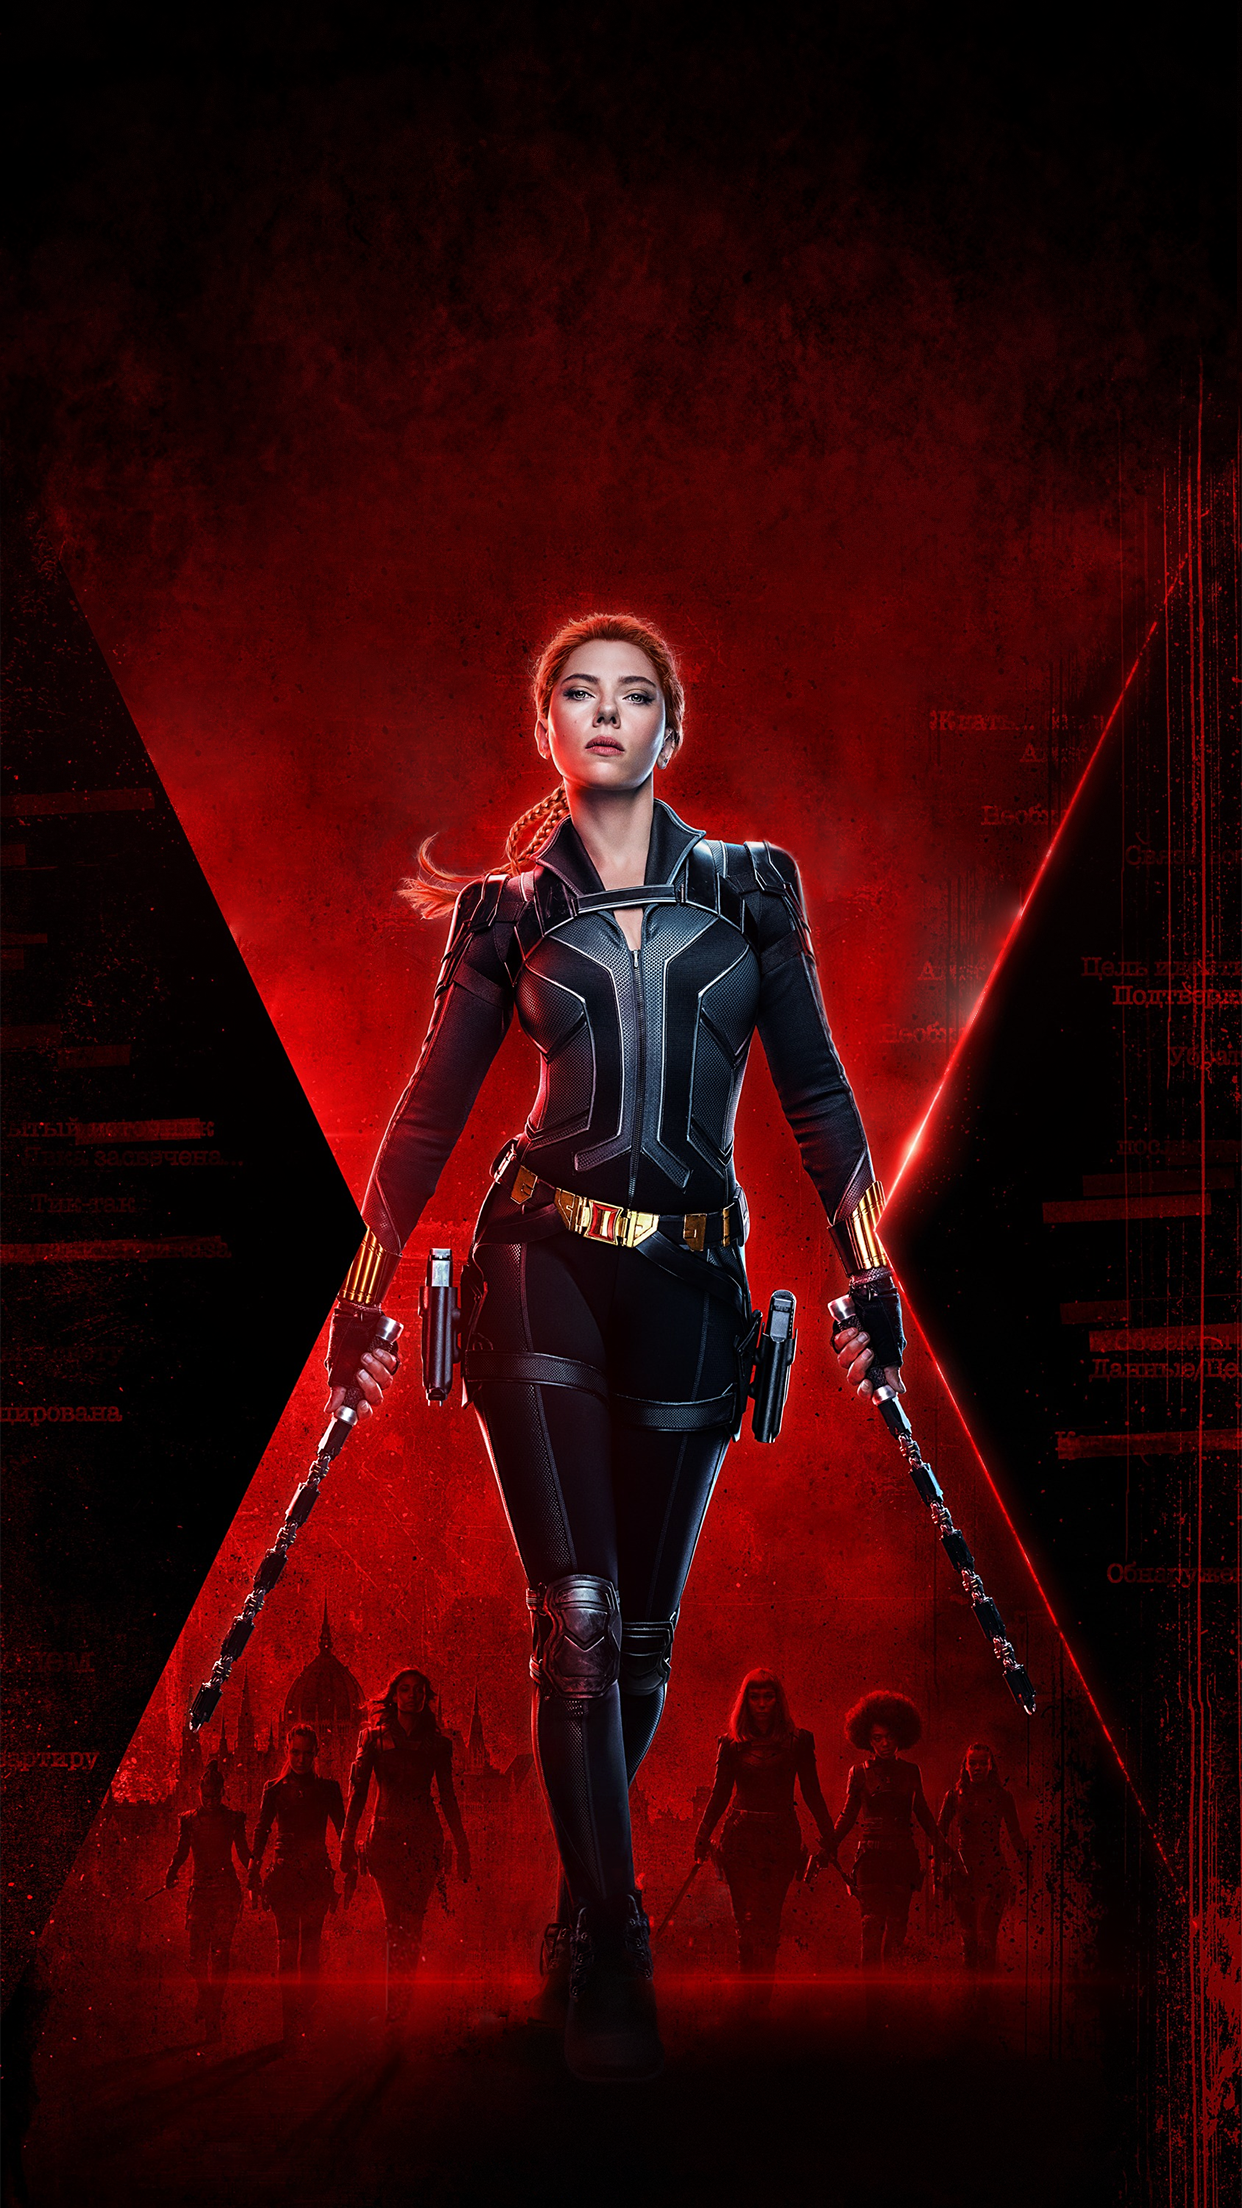 Black Widow Lock Screen iPhone 7+, link in comments for Homescreen as well